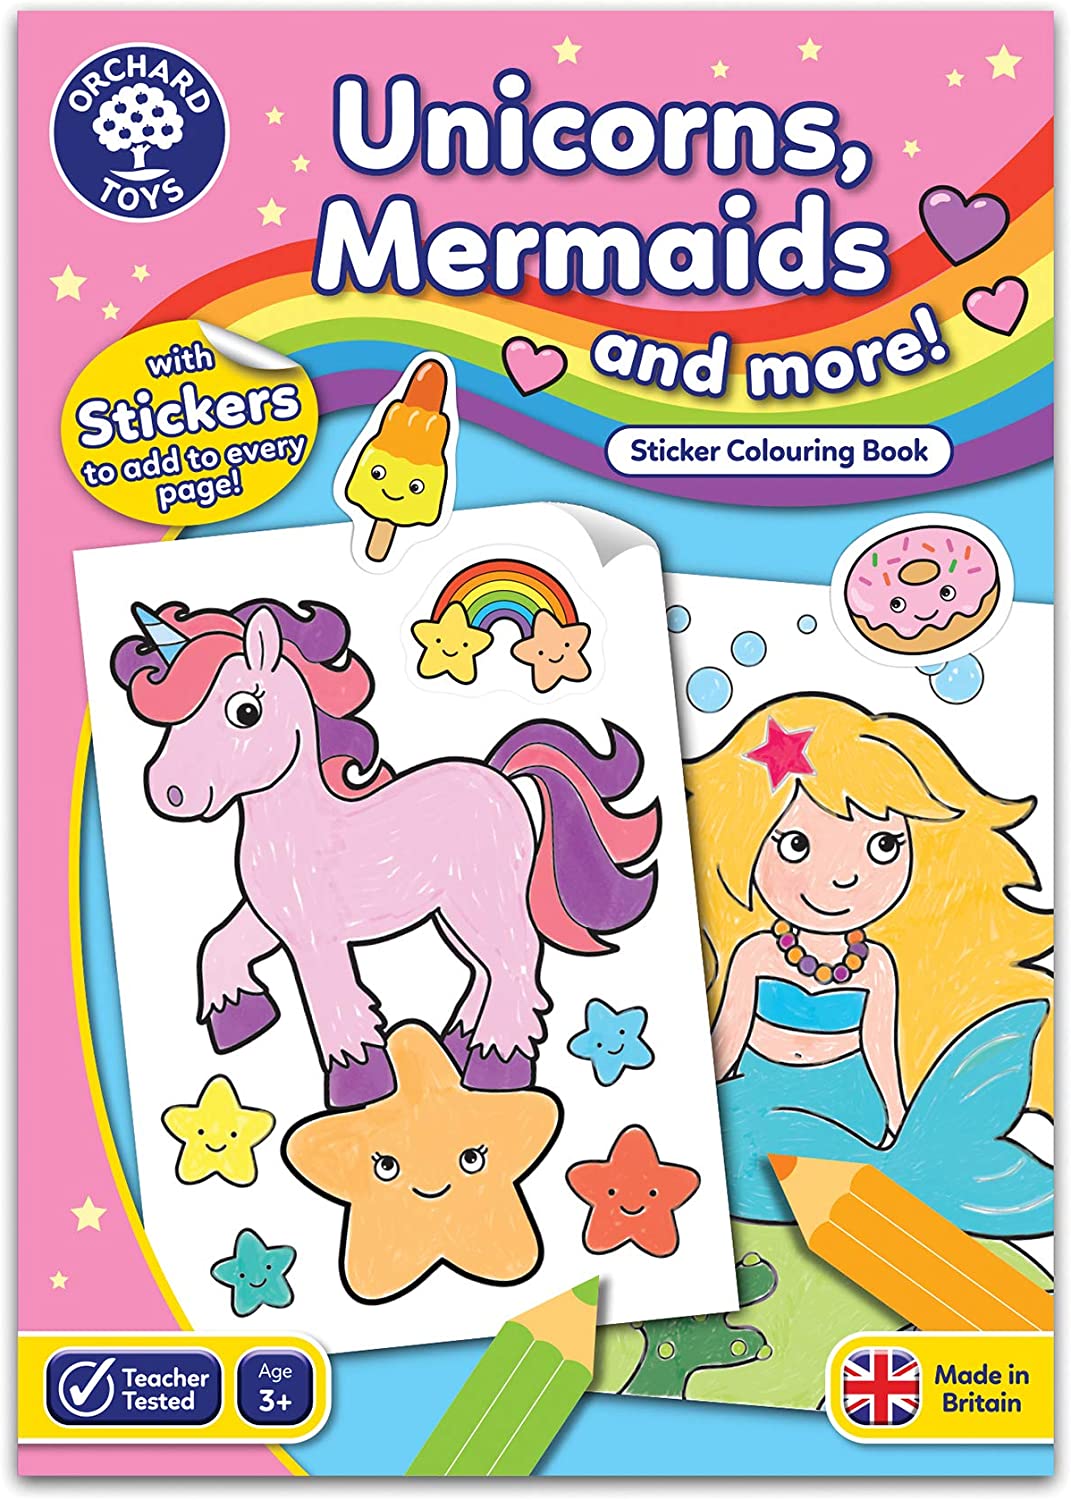 Unicorns, Mermaids and More Colouring Book - Orchard Toys